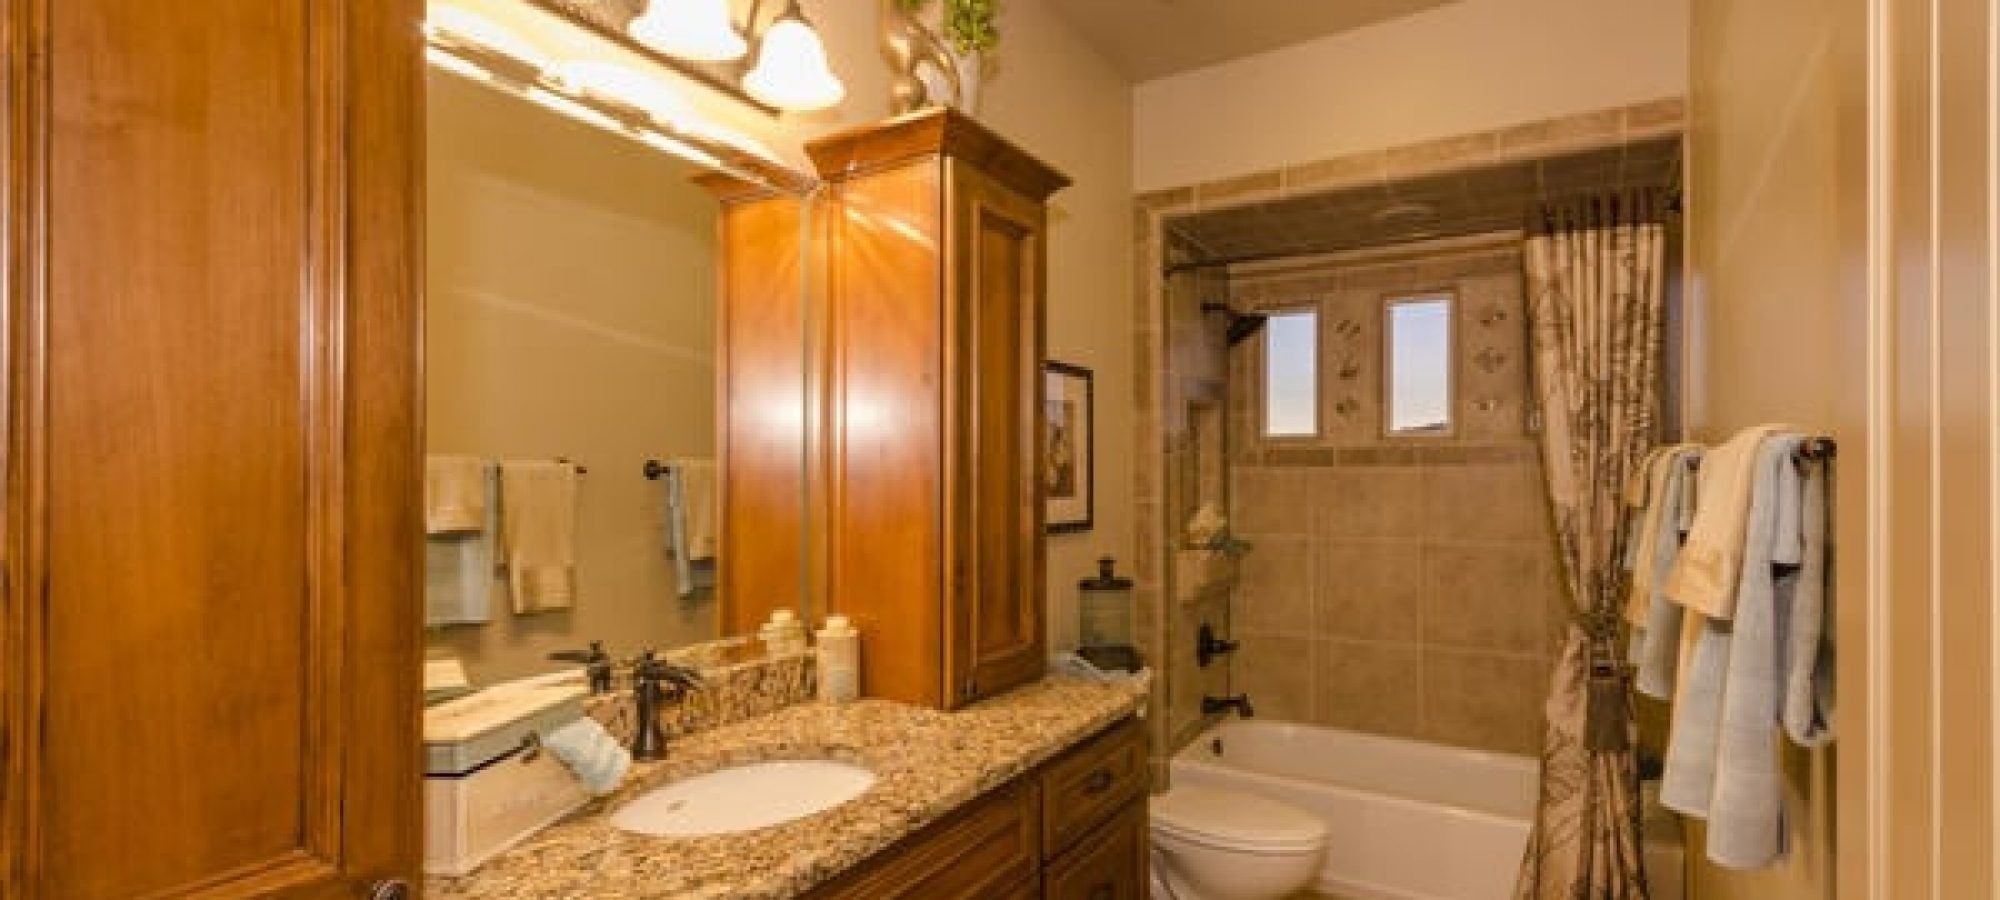 a newly remodeled bathroom with bright lights and oak cabinets